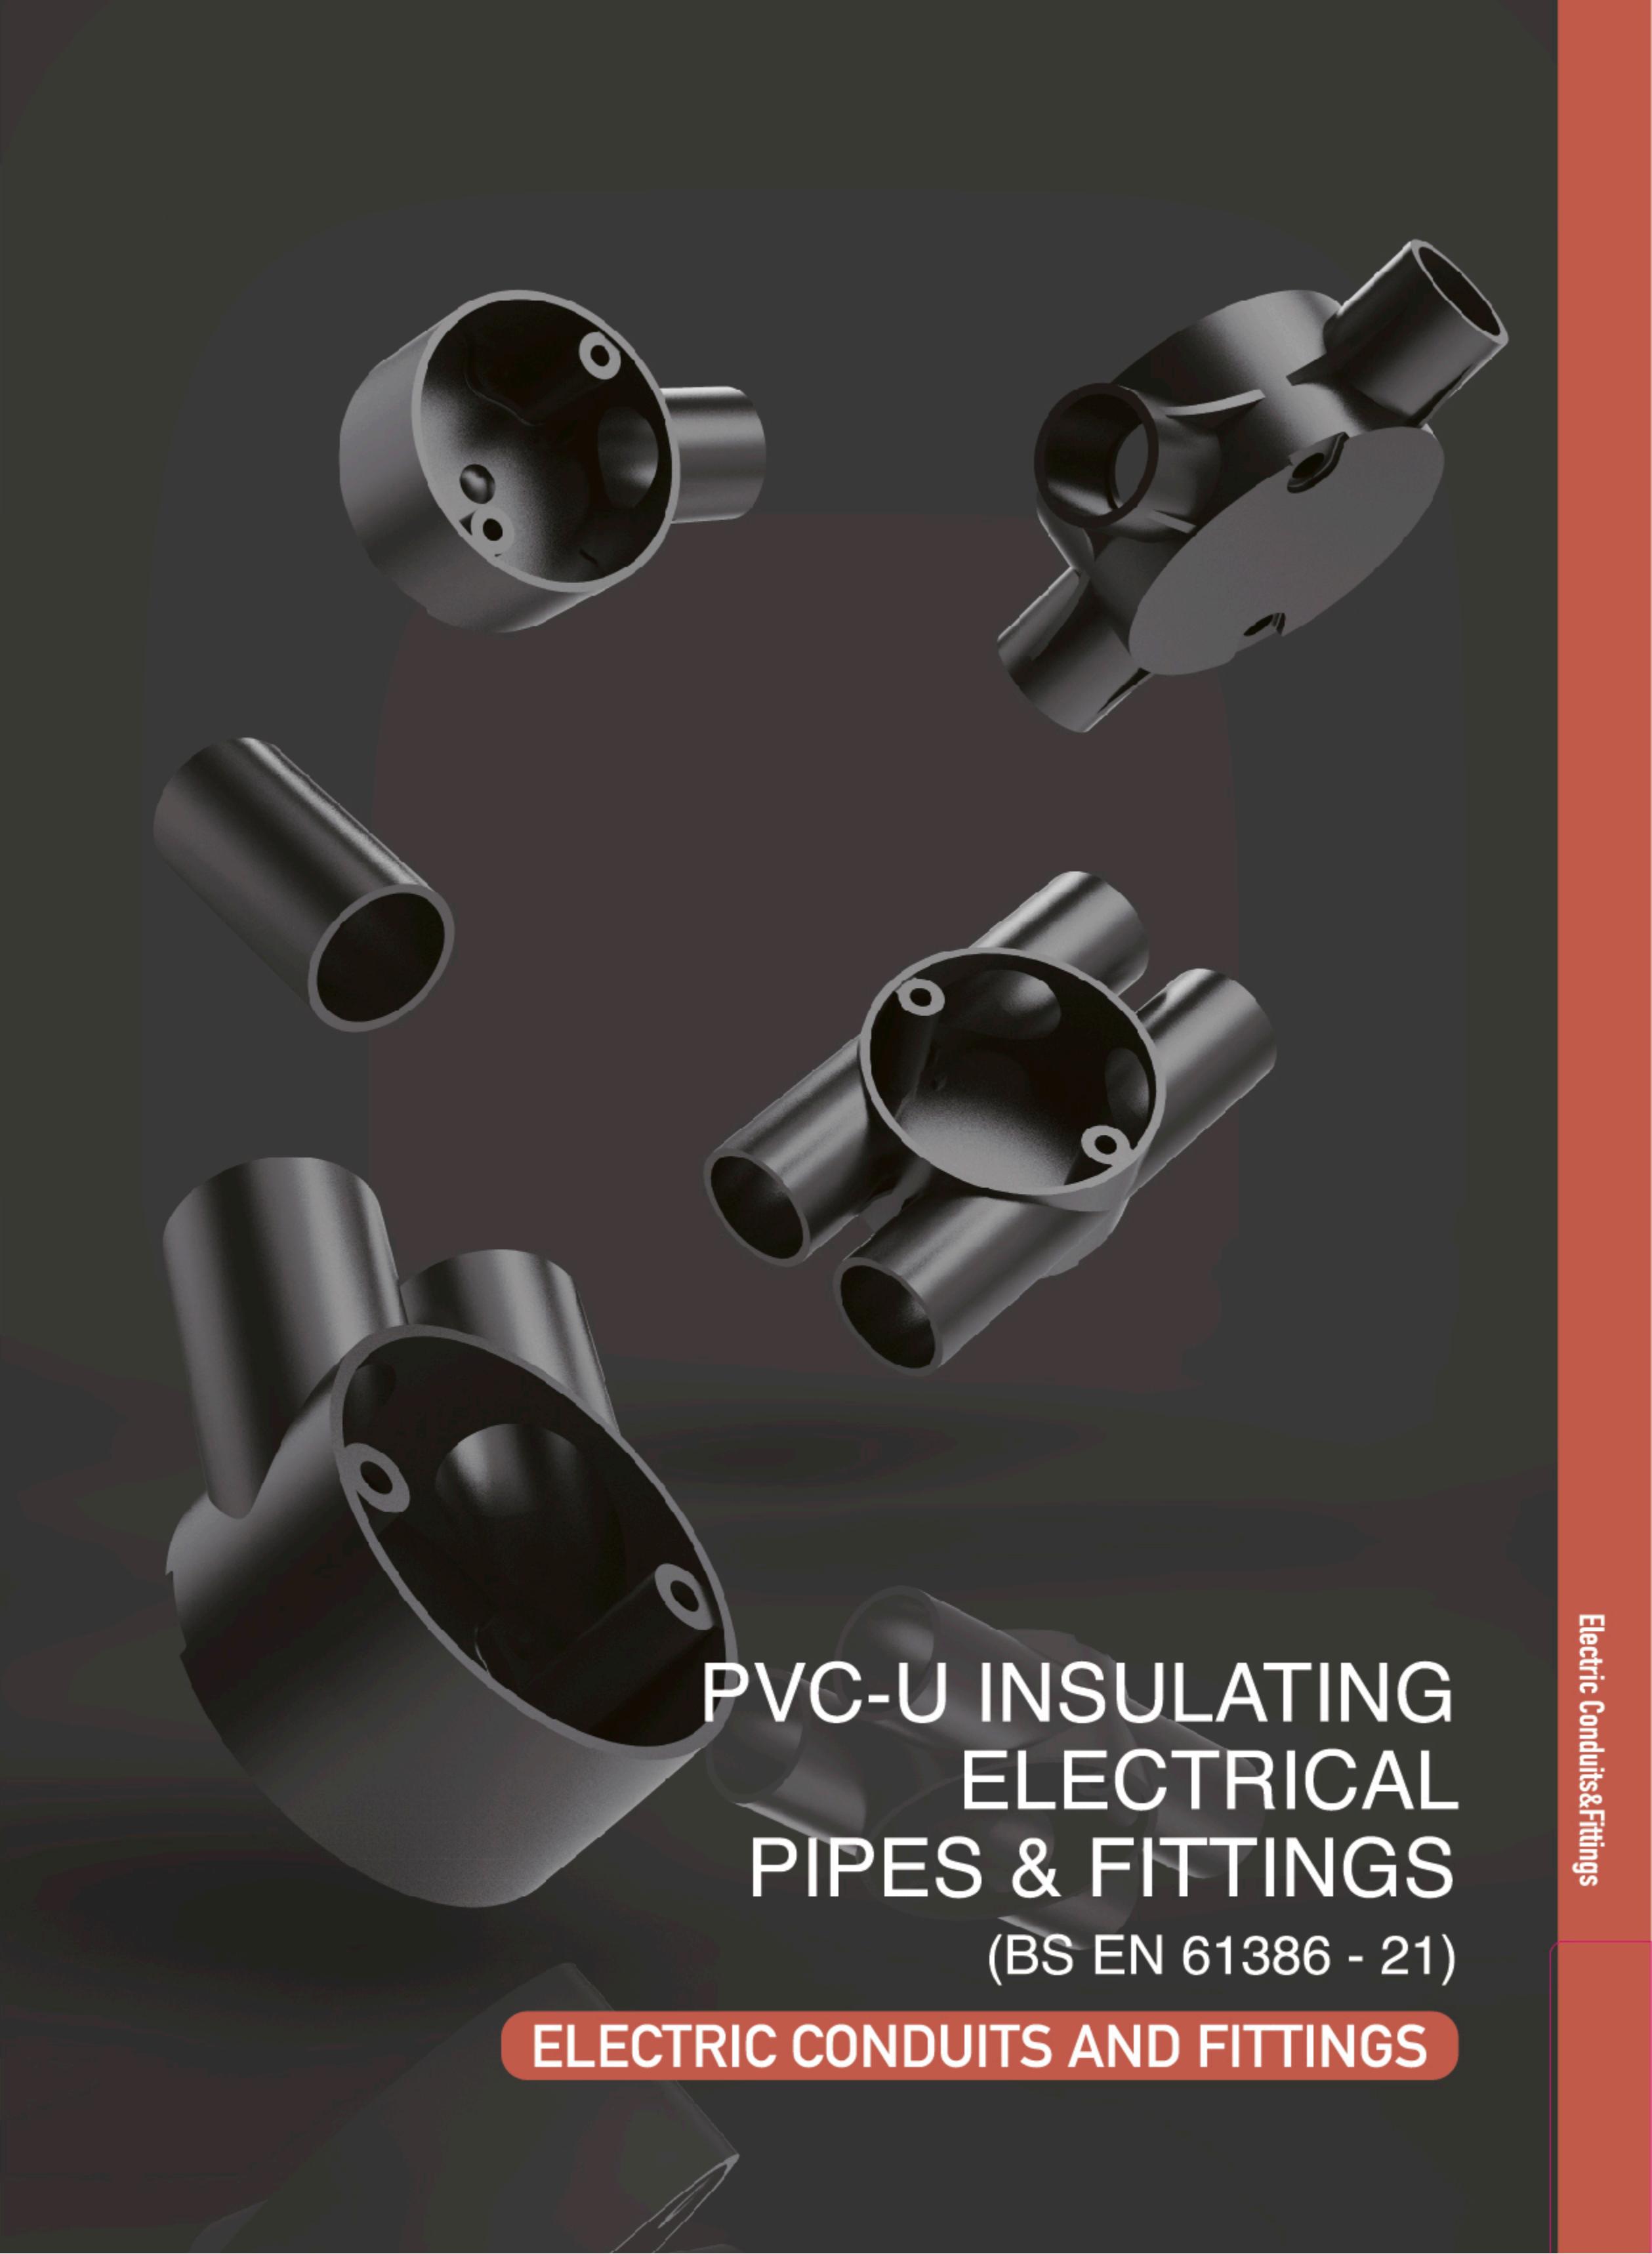 PVC INSULATING ELECTRICAL PIPES AND FITTINGS